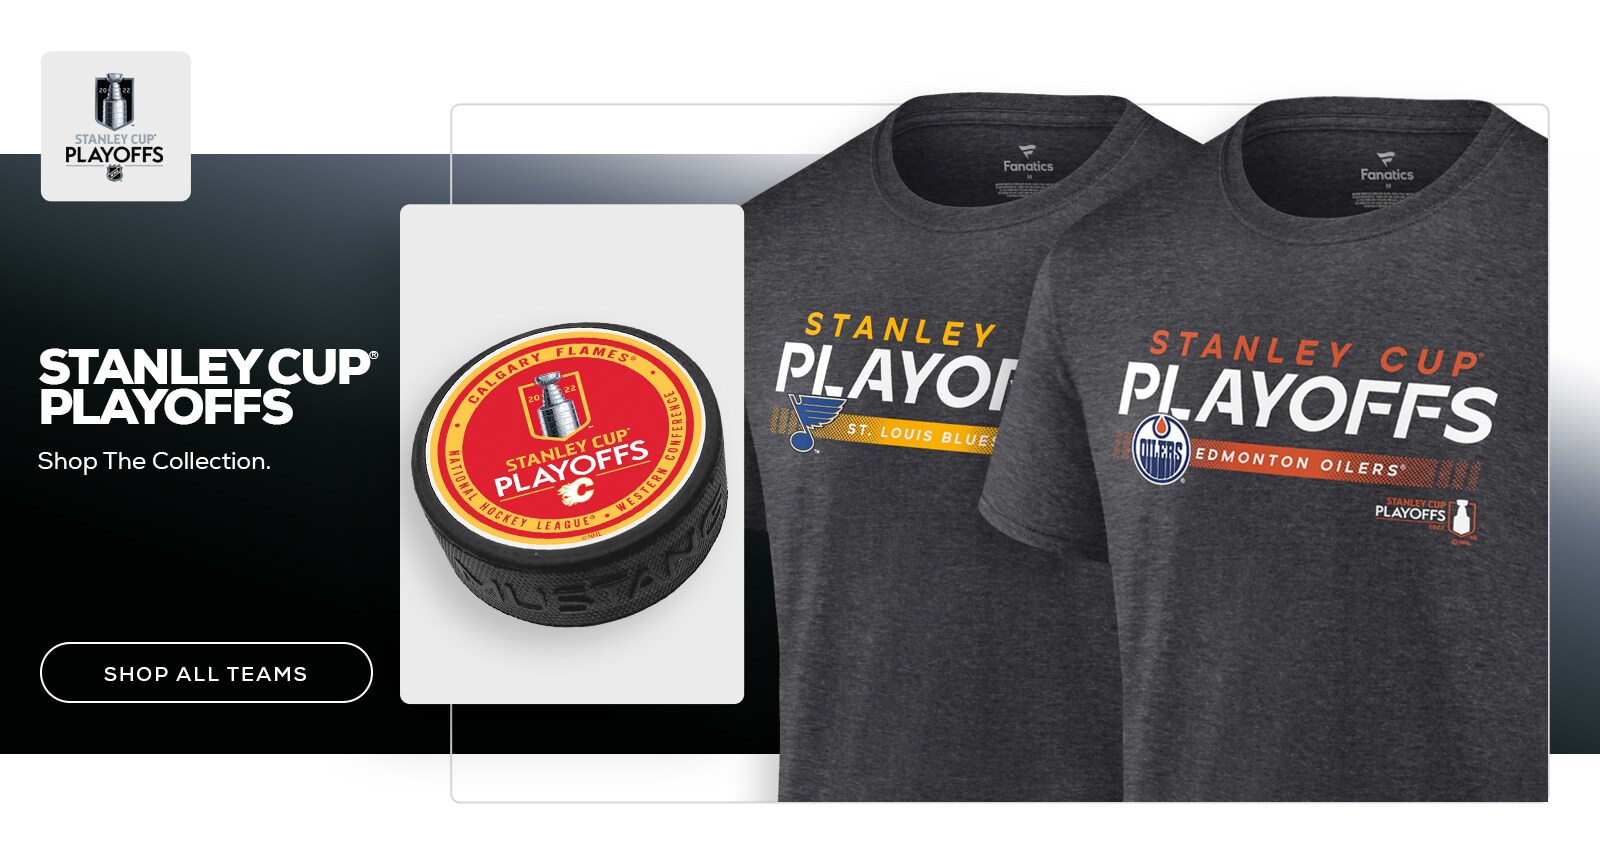 Stanley Cup Playoffs. Shop The Collection